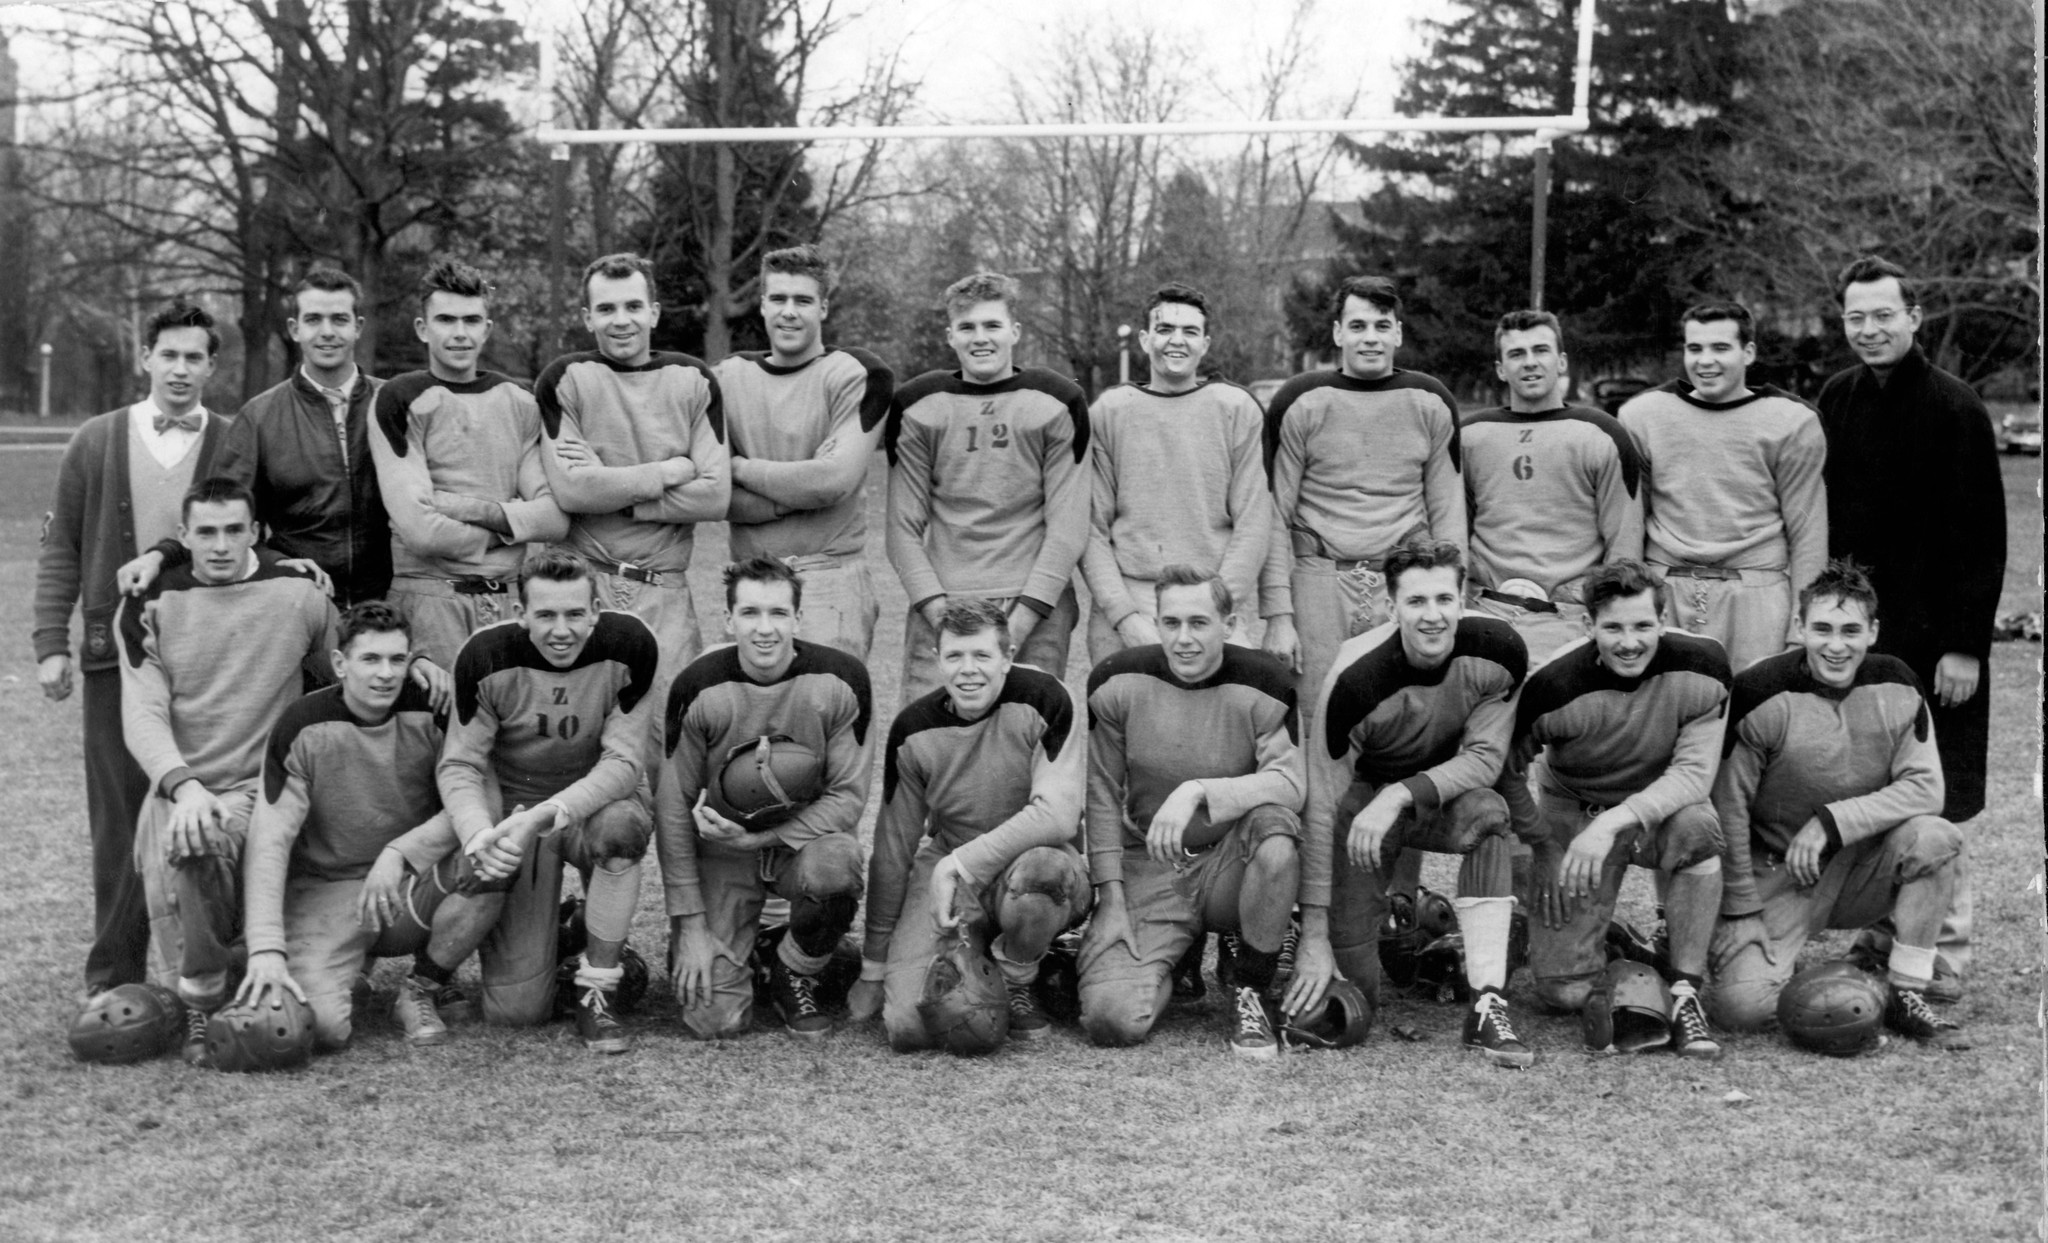 Black and white photo of nearly two dozen members of OAC's 1953 Intramural Football team pose on a field